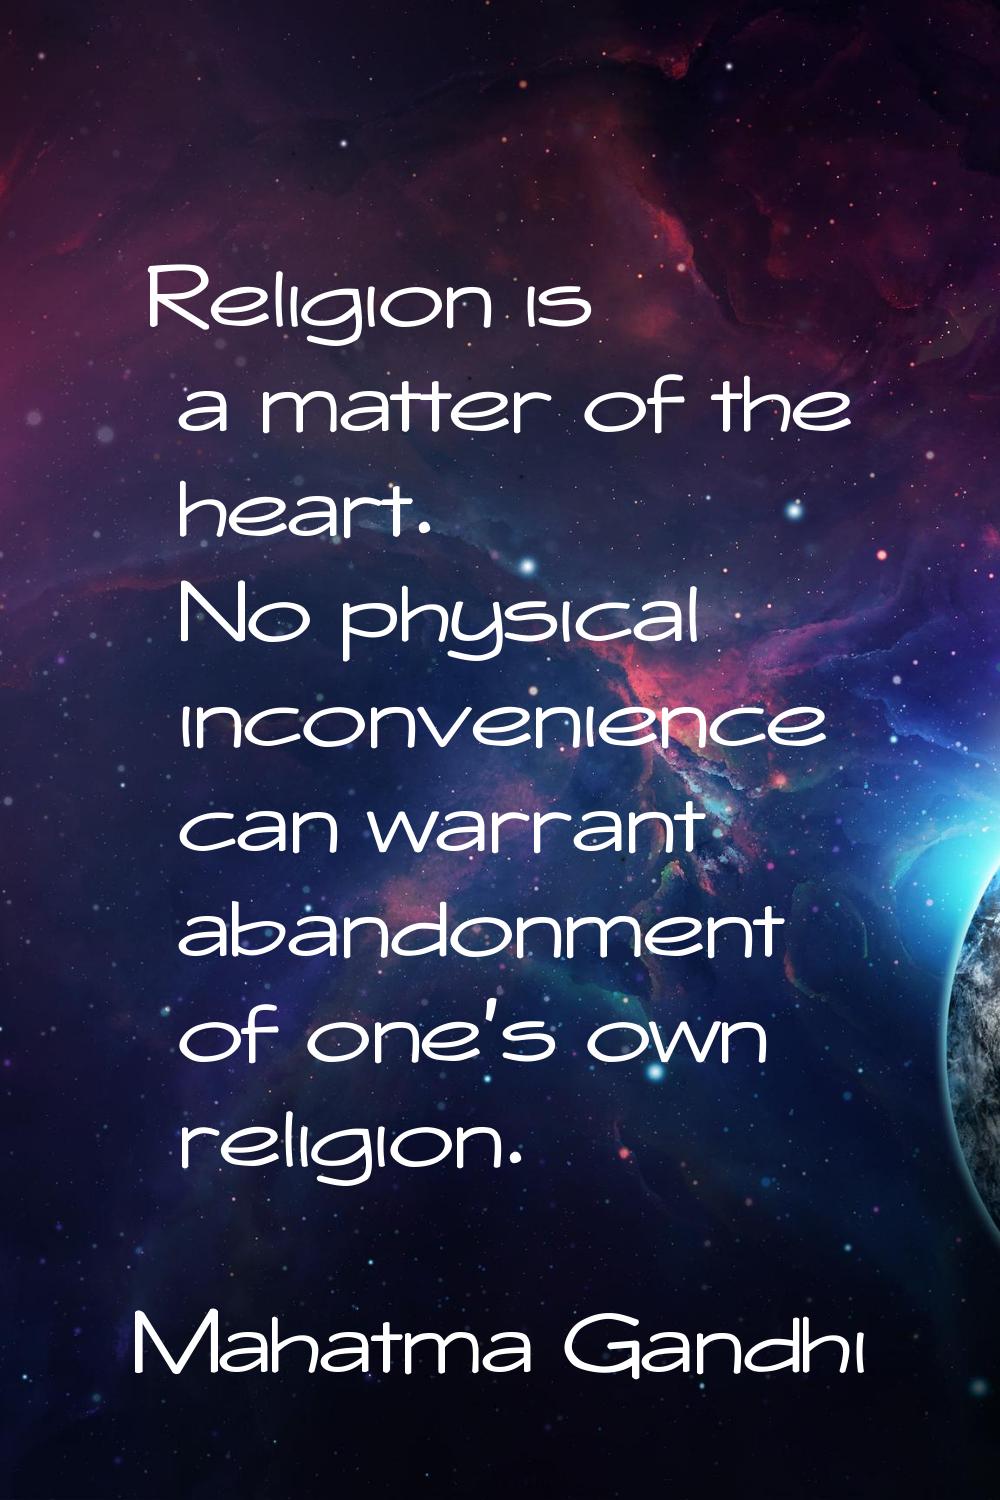 Religion is a matter of the heart. No physical inconvenience can warrant abandonment of one's own r